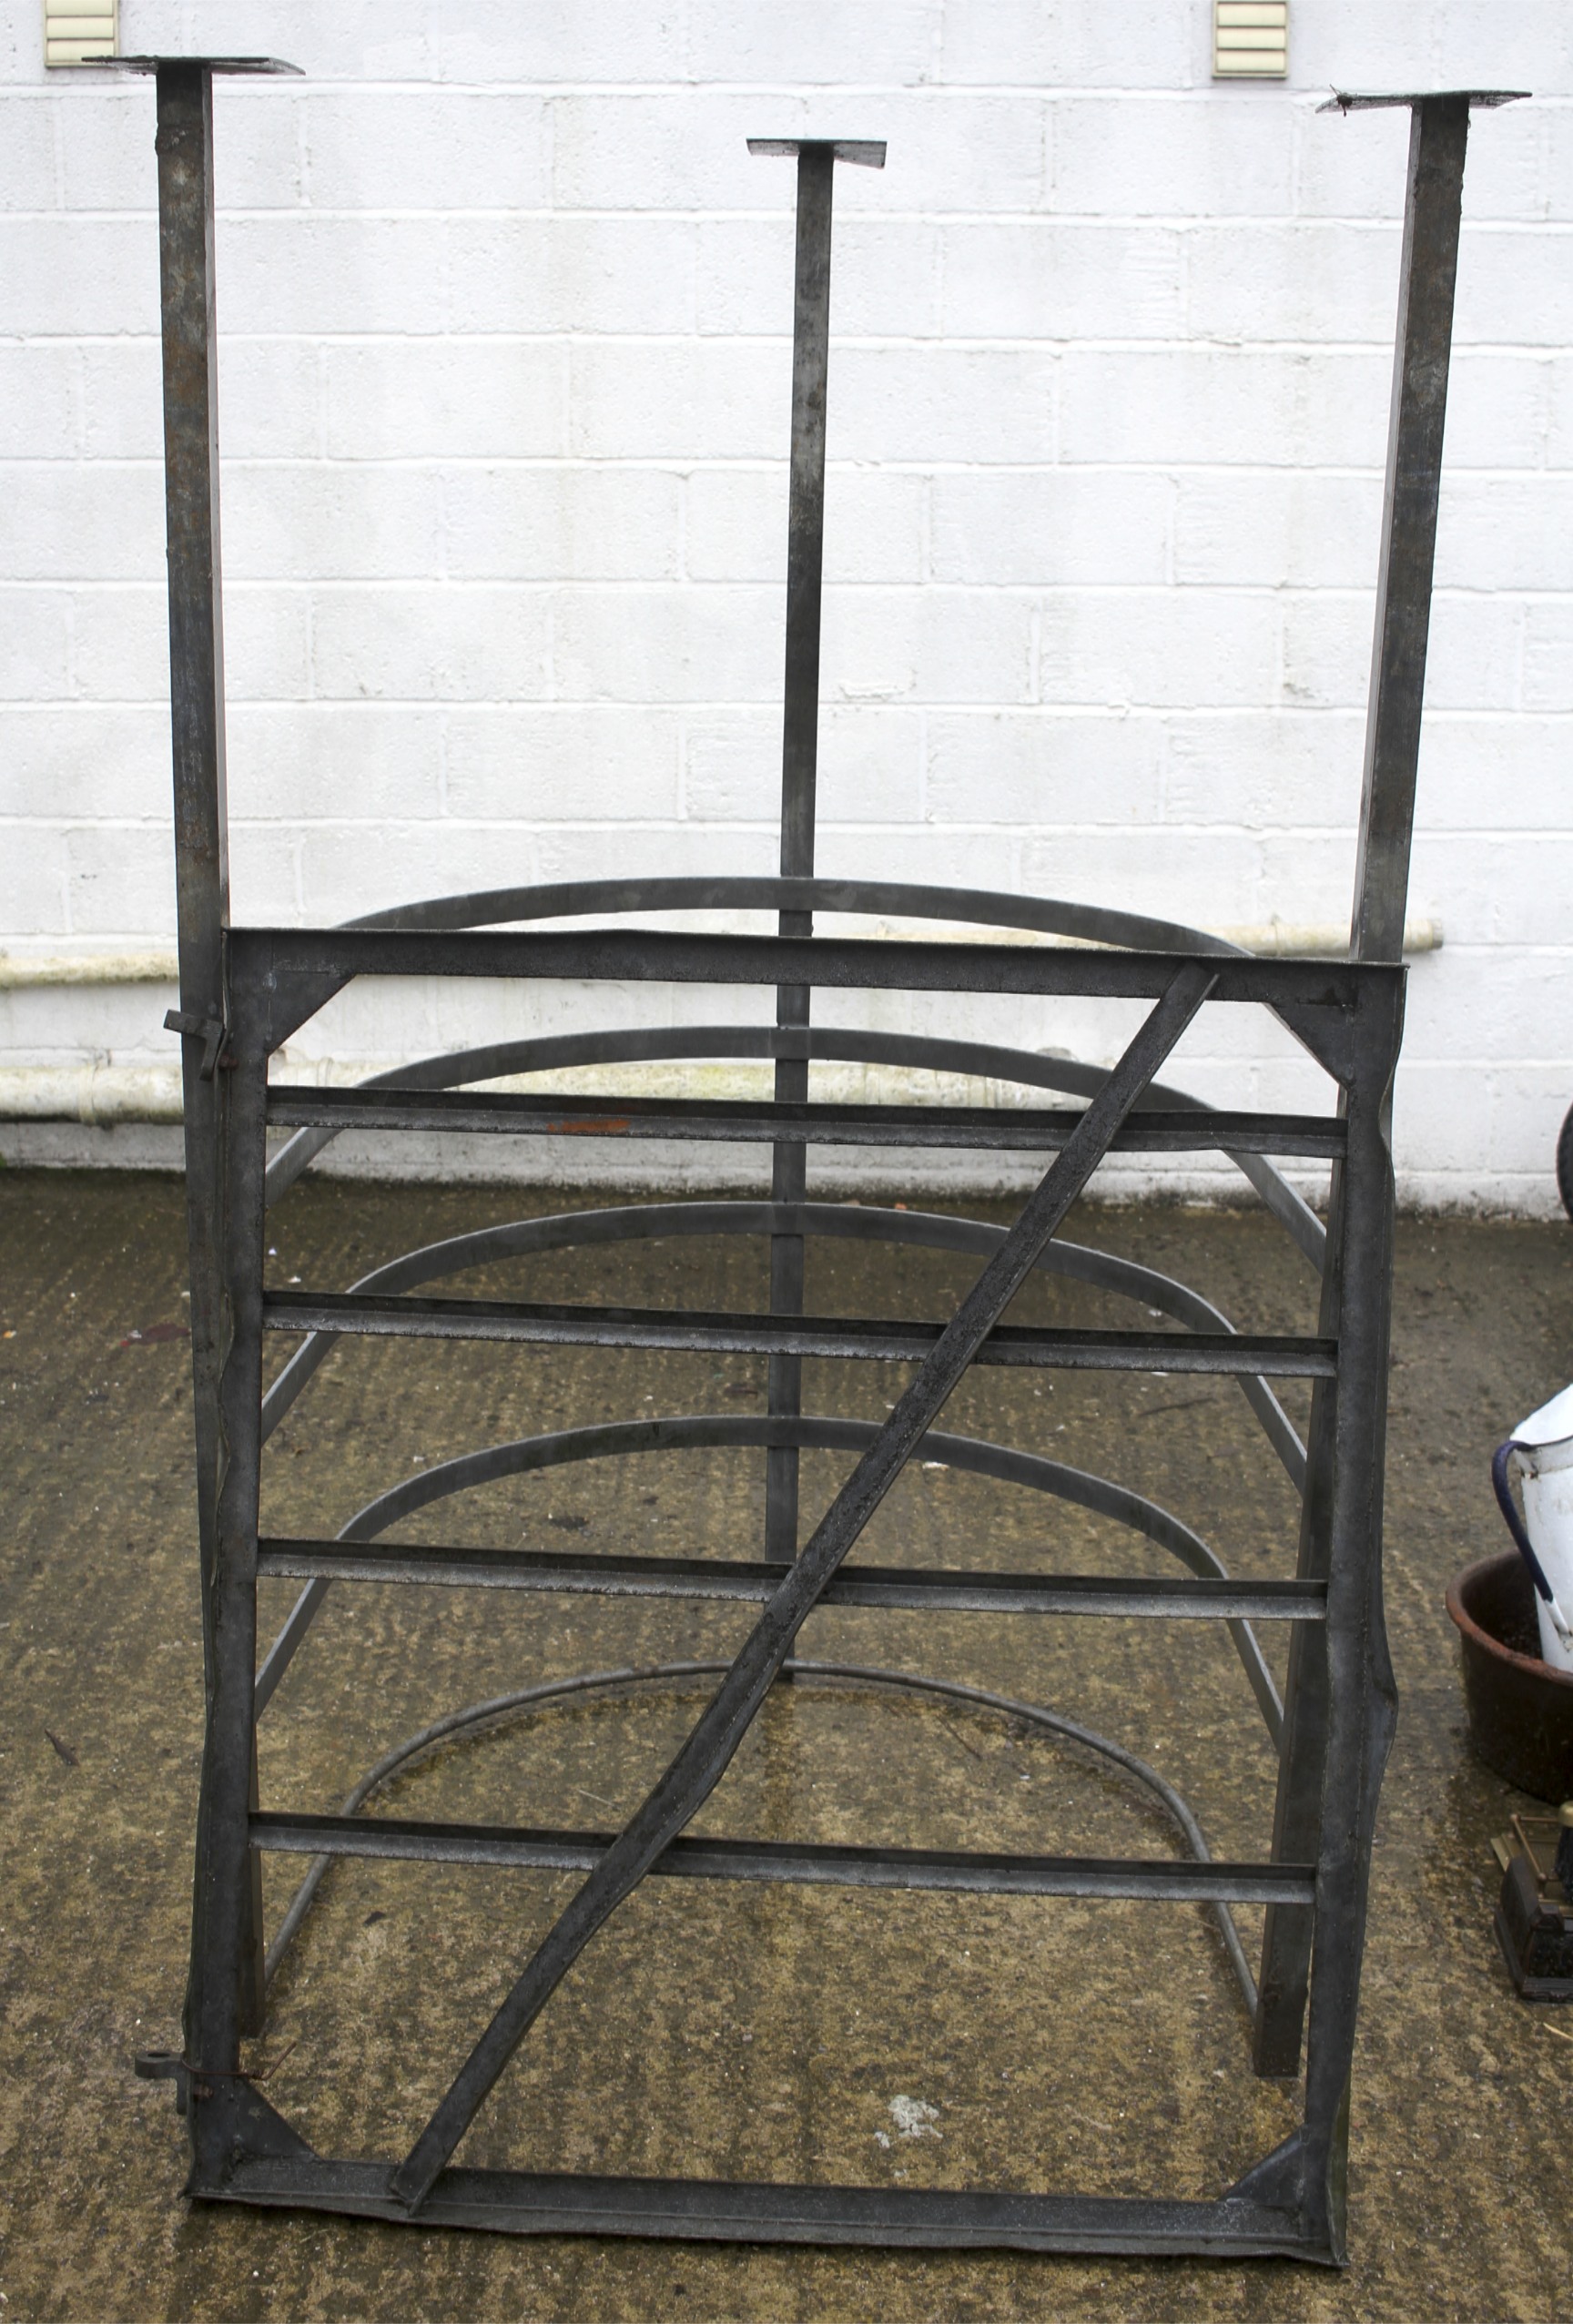 A galvanized metal style with a gate. L9